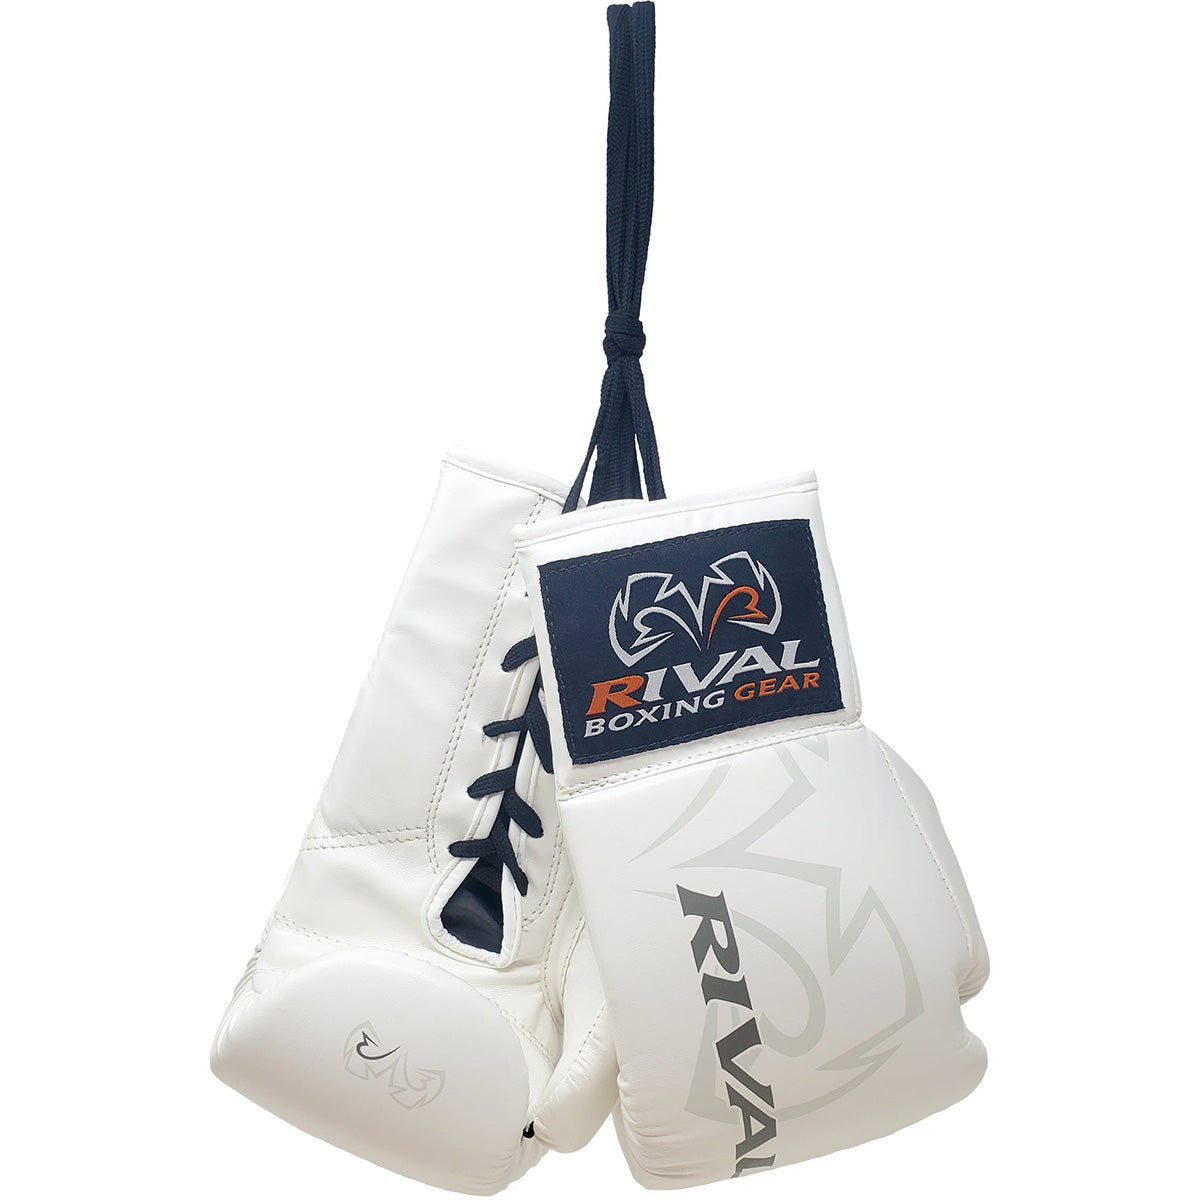 Rival Boxing Autograph Boxing Gloves - White RIVAL